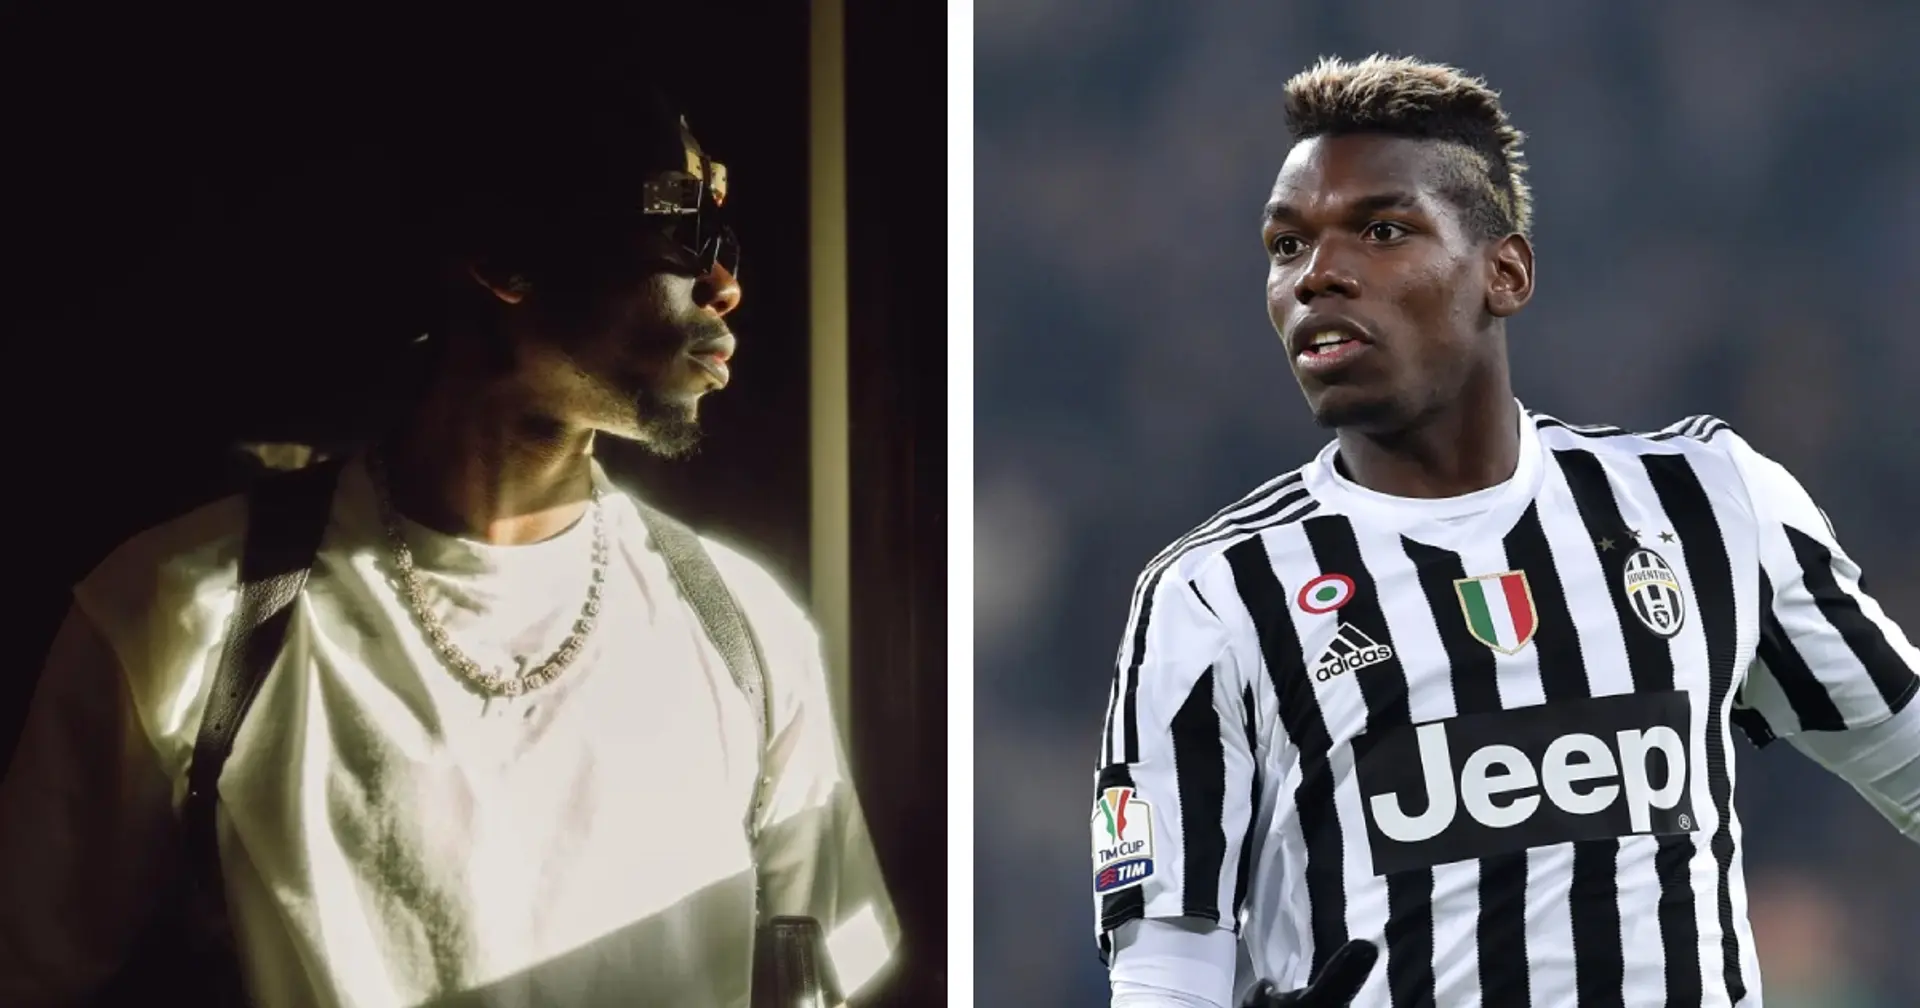 'Don't worry about the future': Paul Pogba appears to tease Juventus move on social media